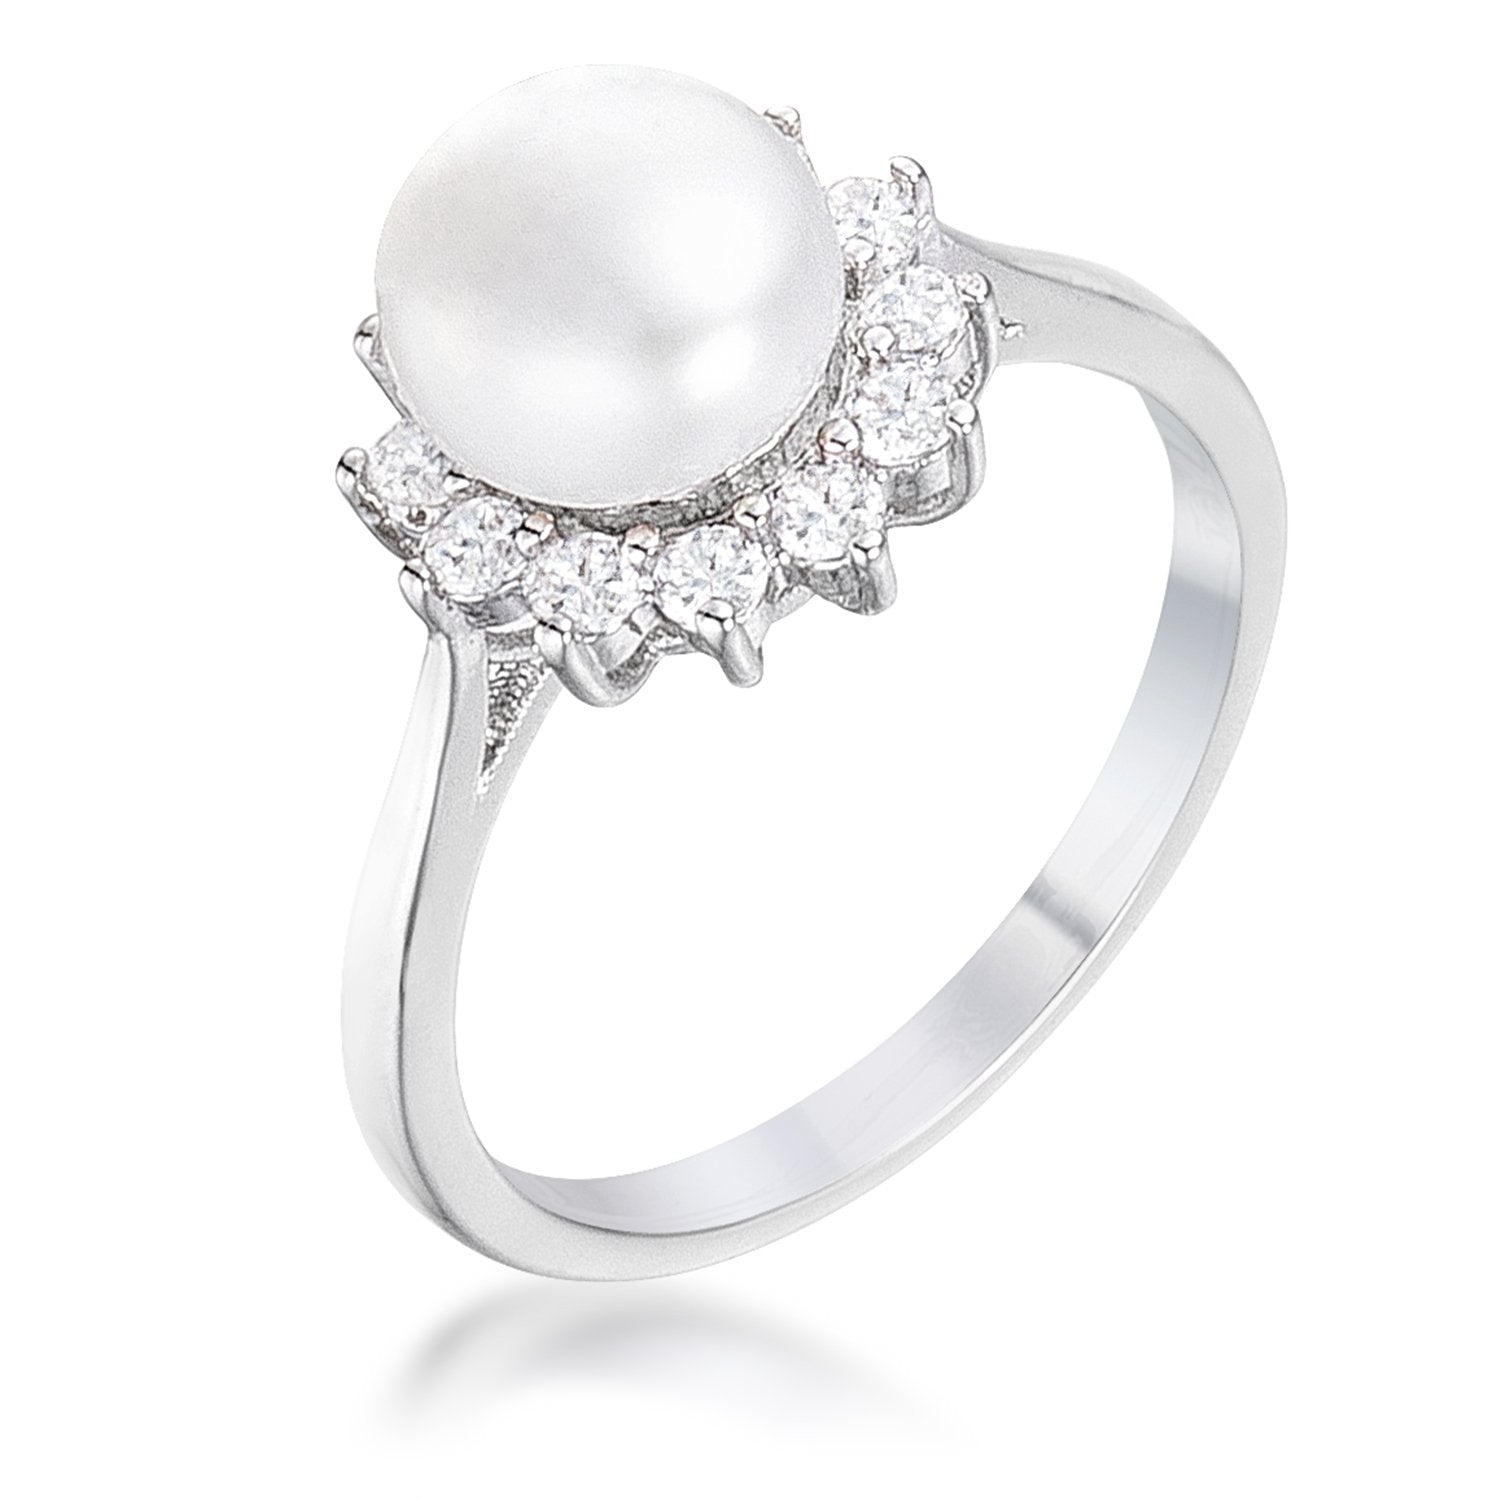 Rhodium Plated Freshwater Pearl and CZ Halo Ring .36Ct - R08595R-C84